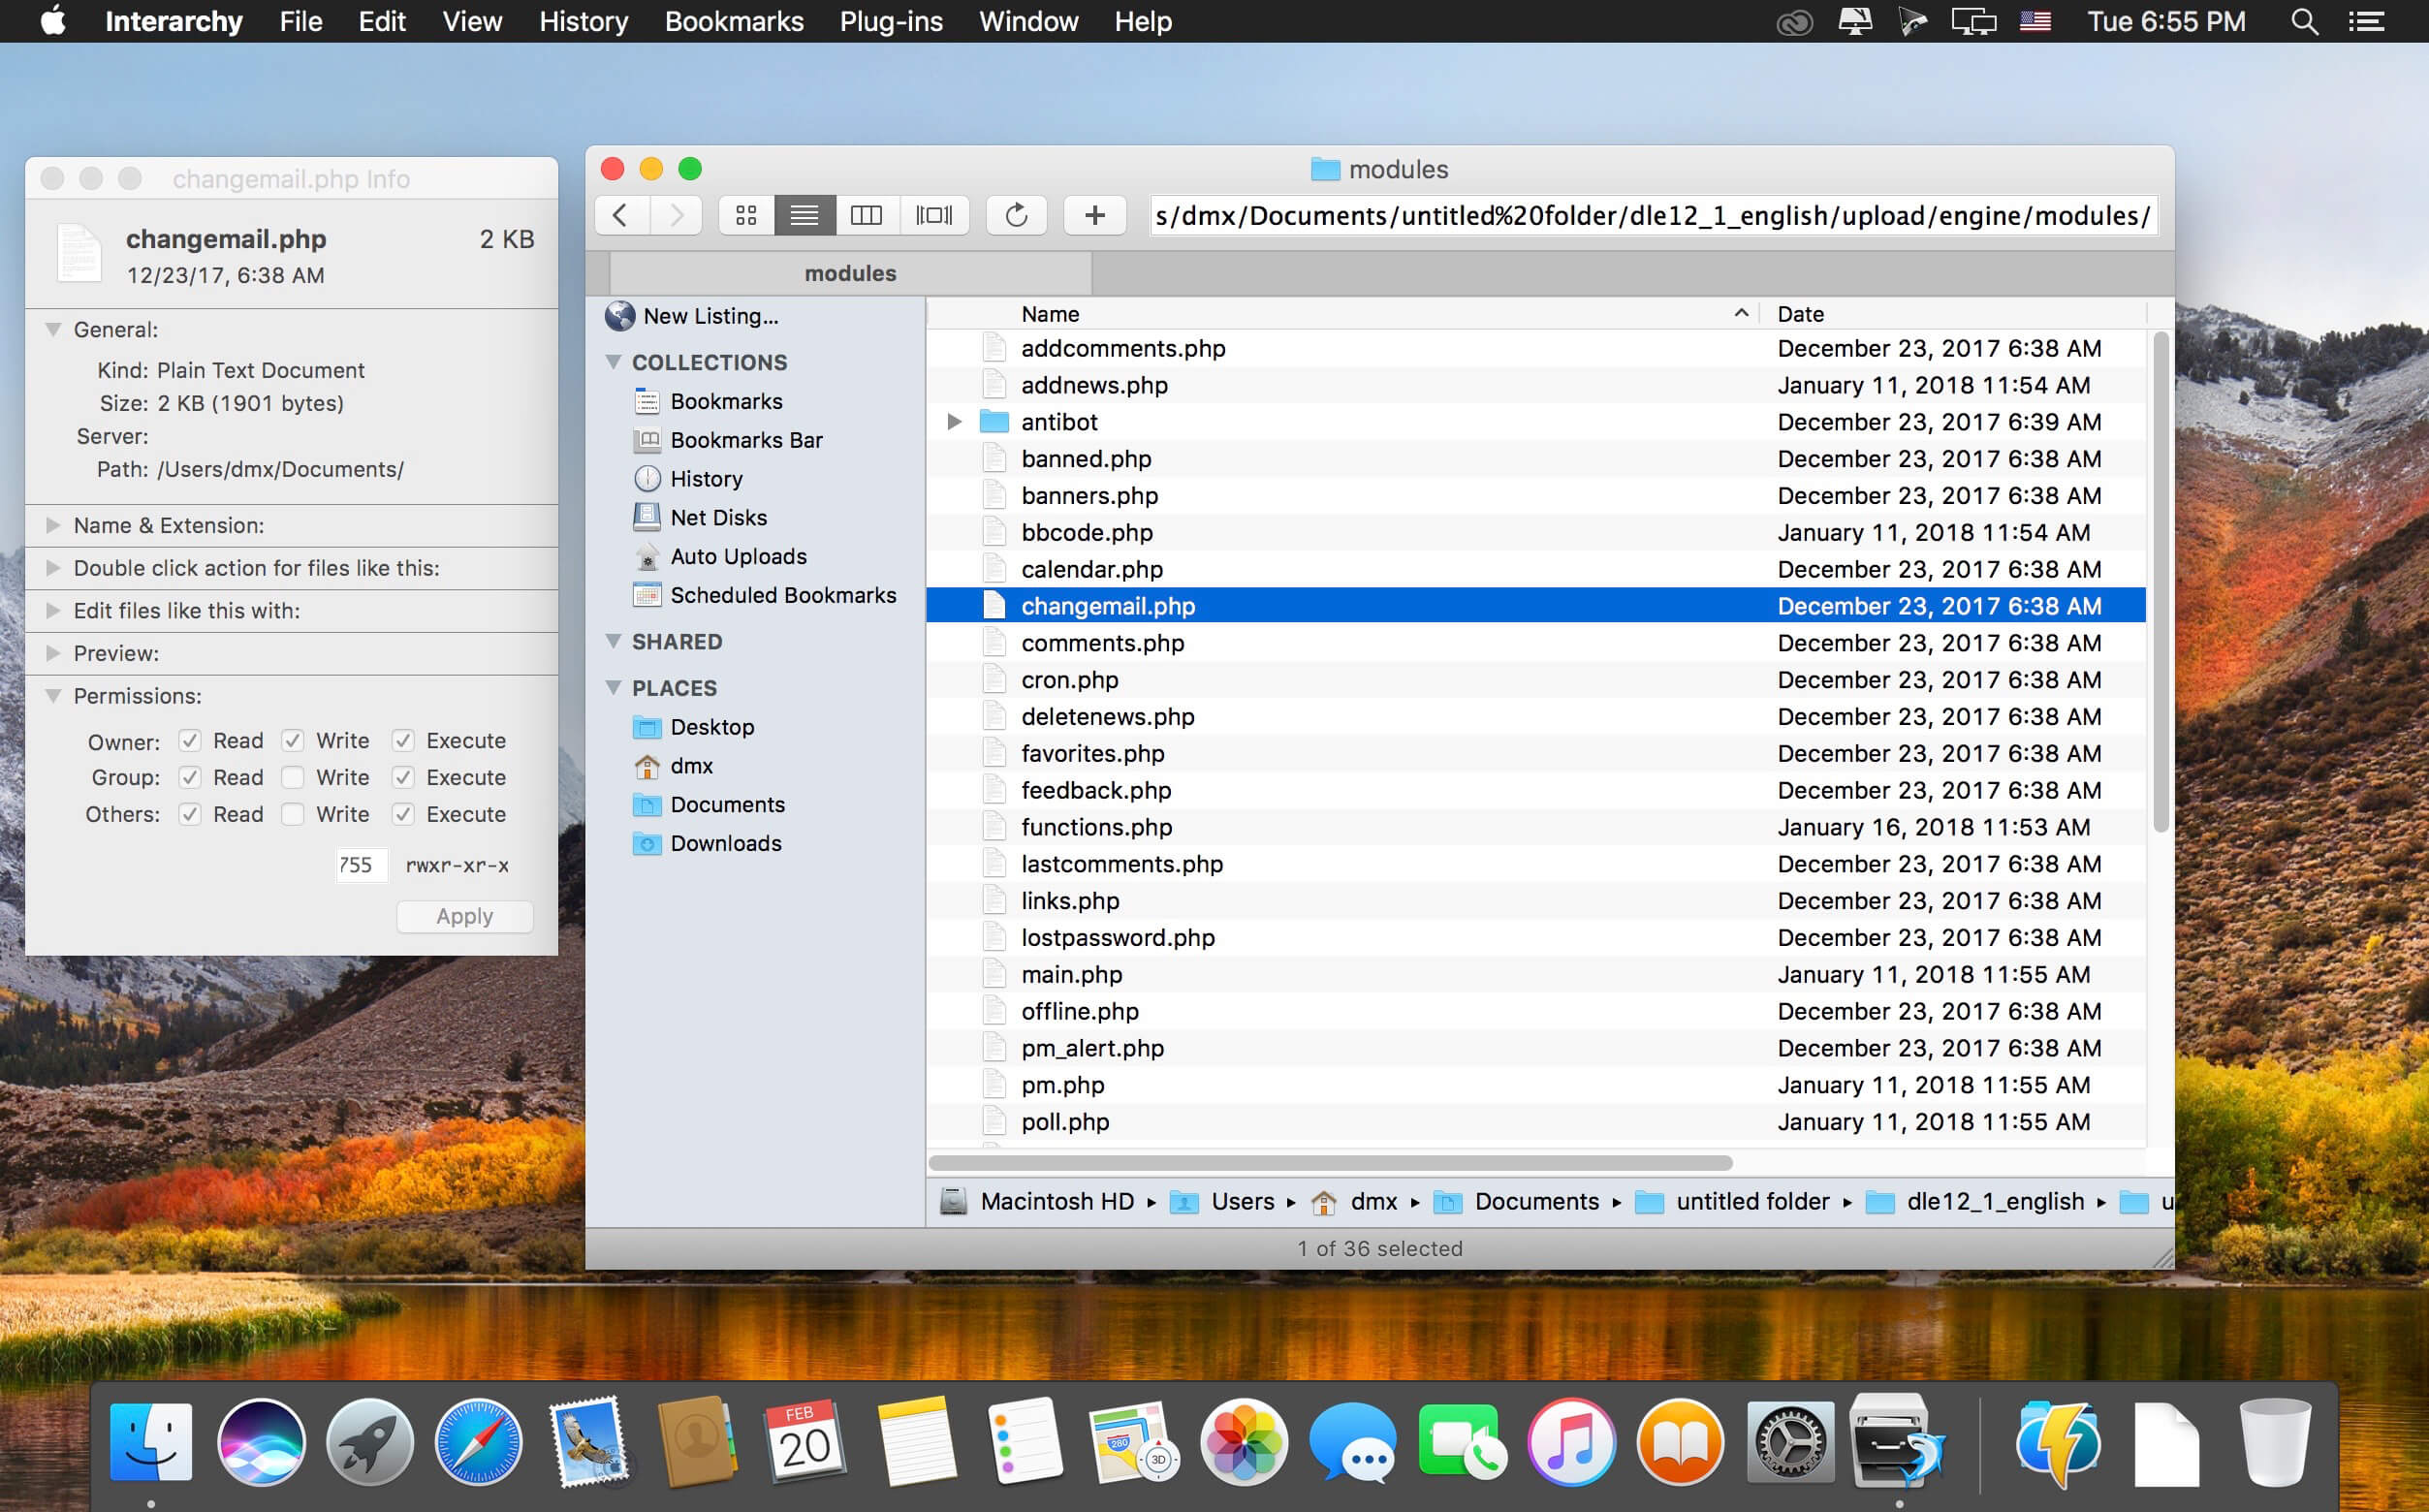 does interarchy have a version compatible with mac os 10.14